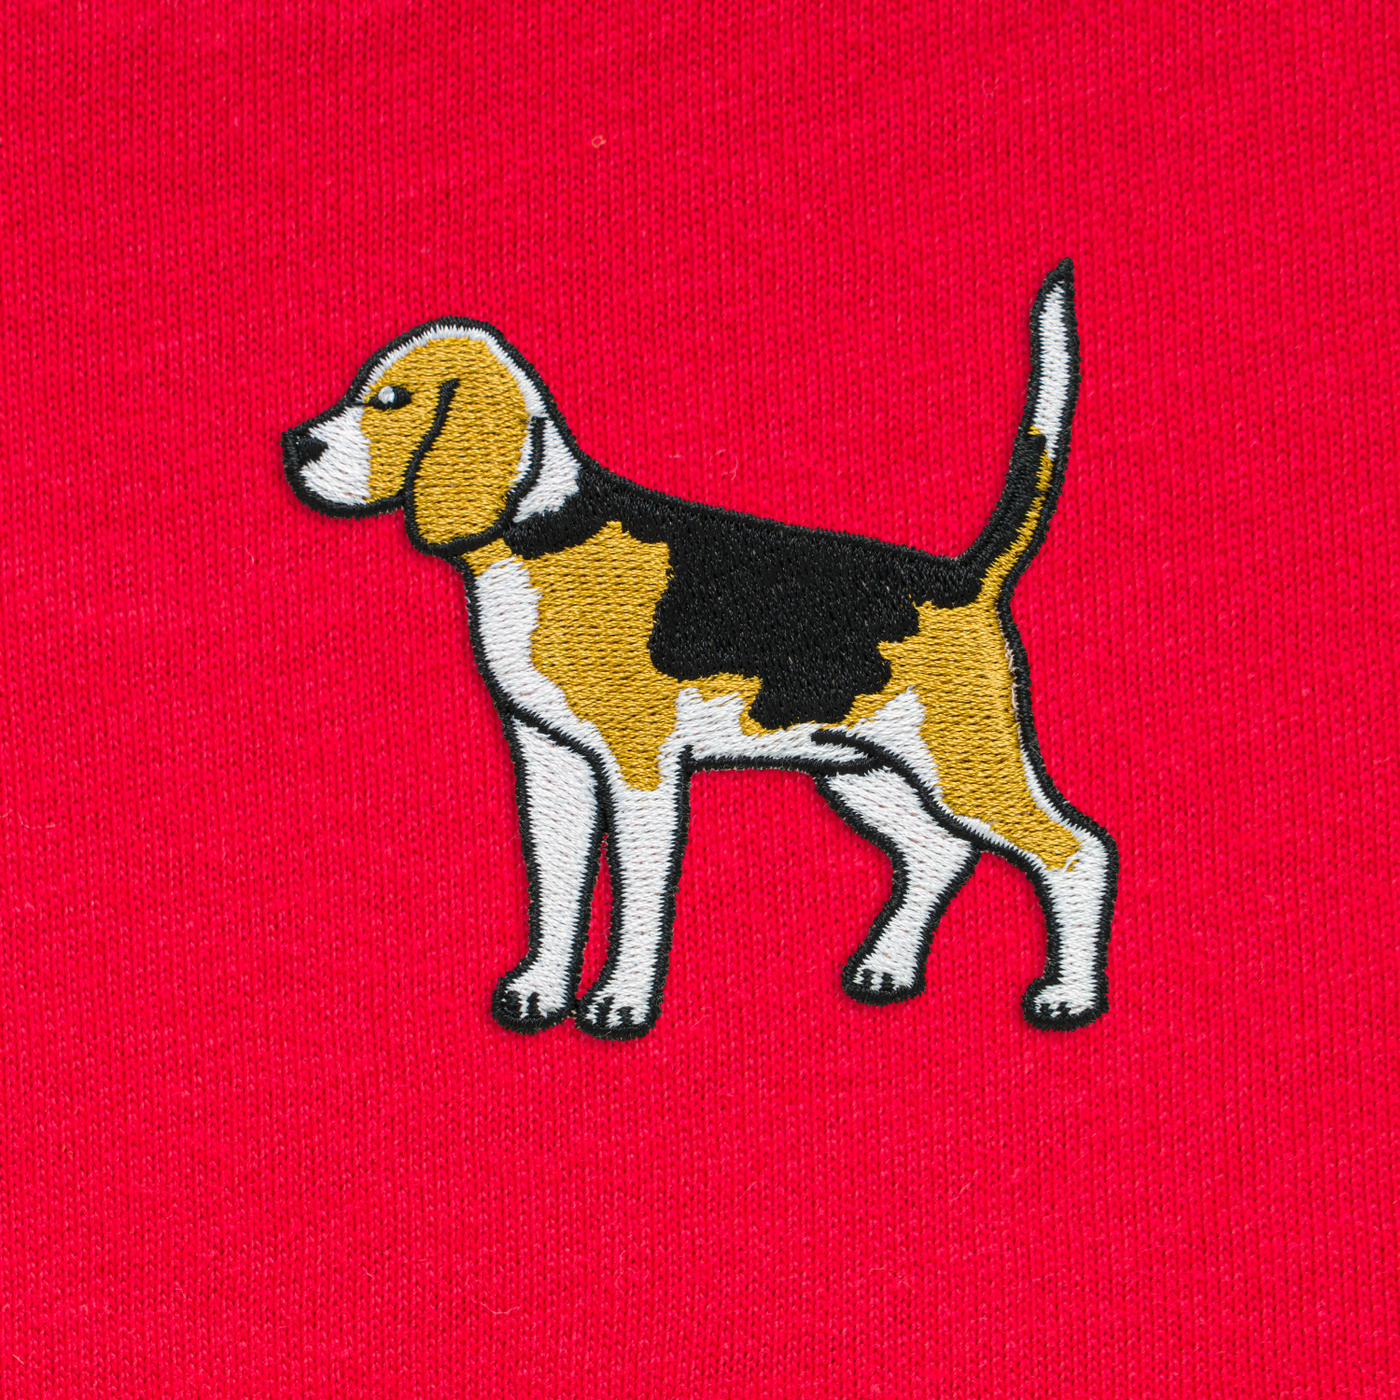 Bobby's Planet Women's Embroidered Beagle T-Shirt from Paws Dog Cat Animals Collection in Red Color#color_red